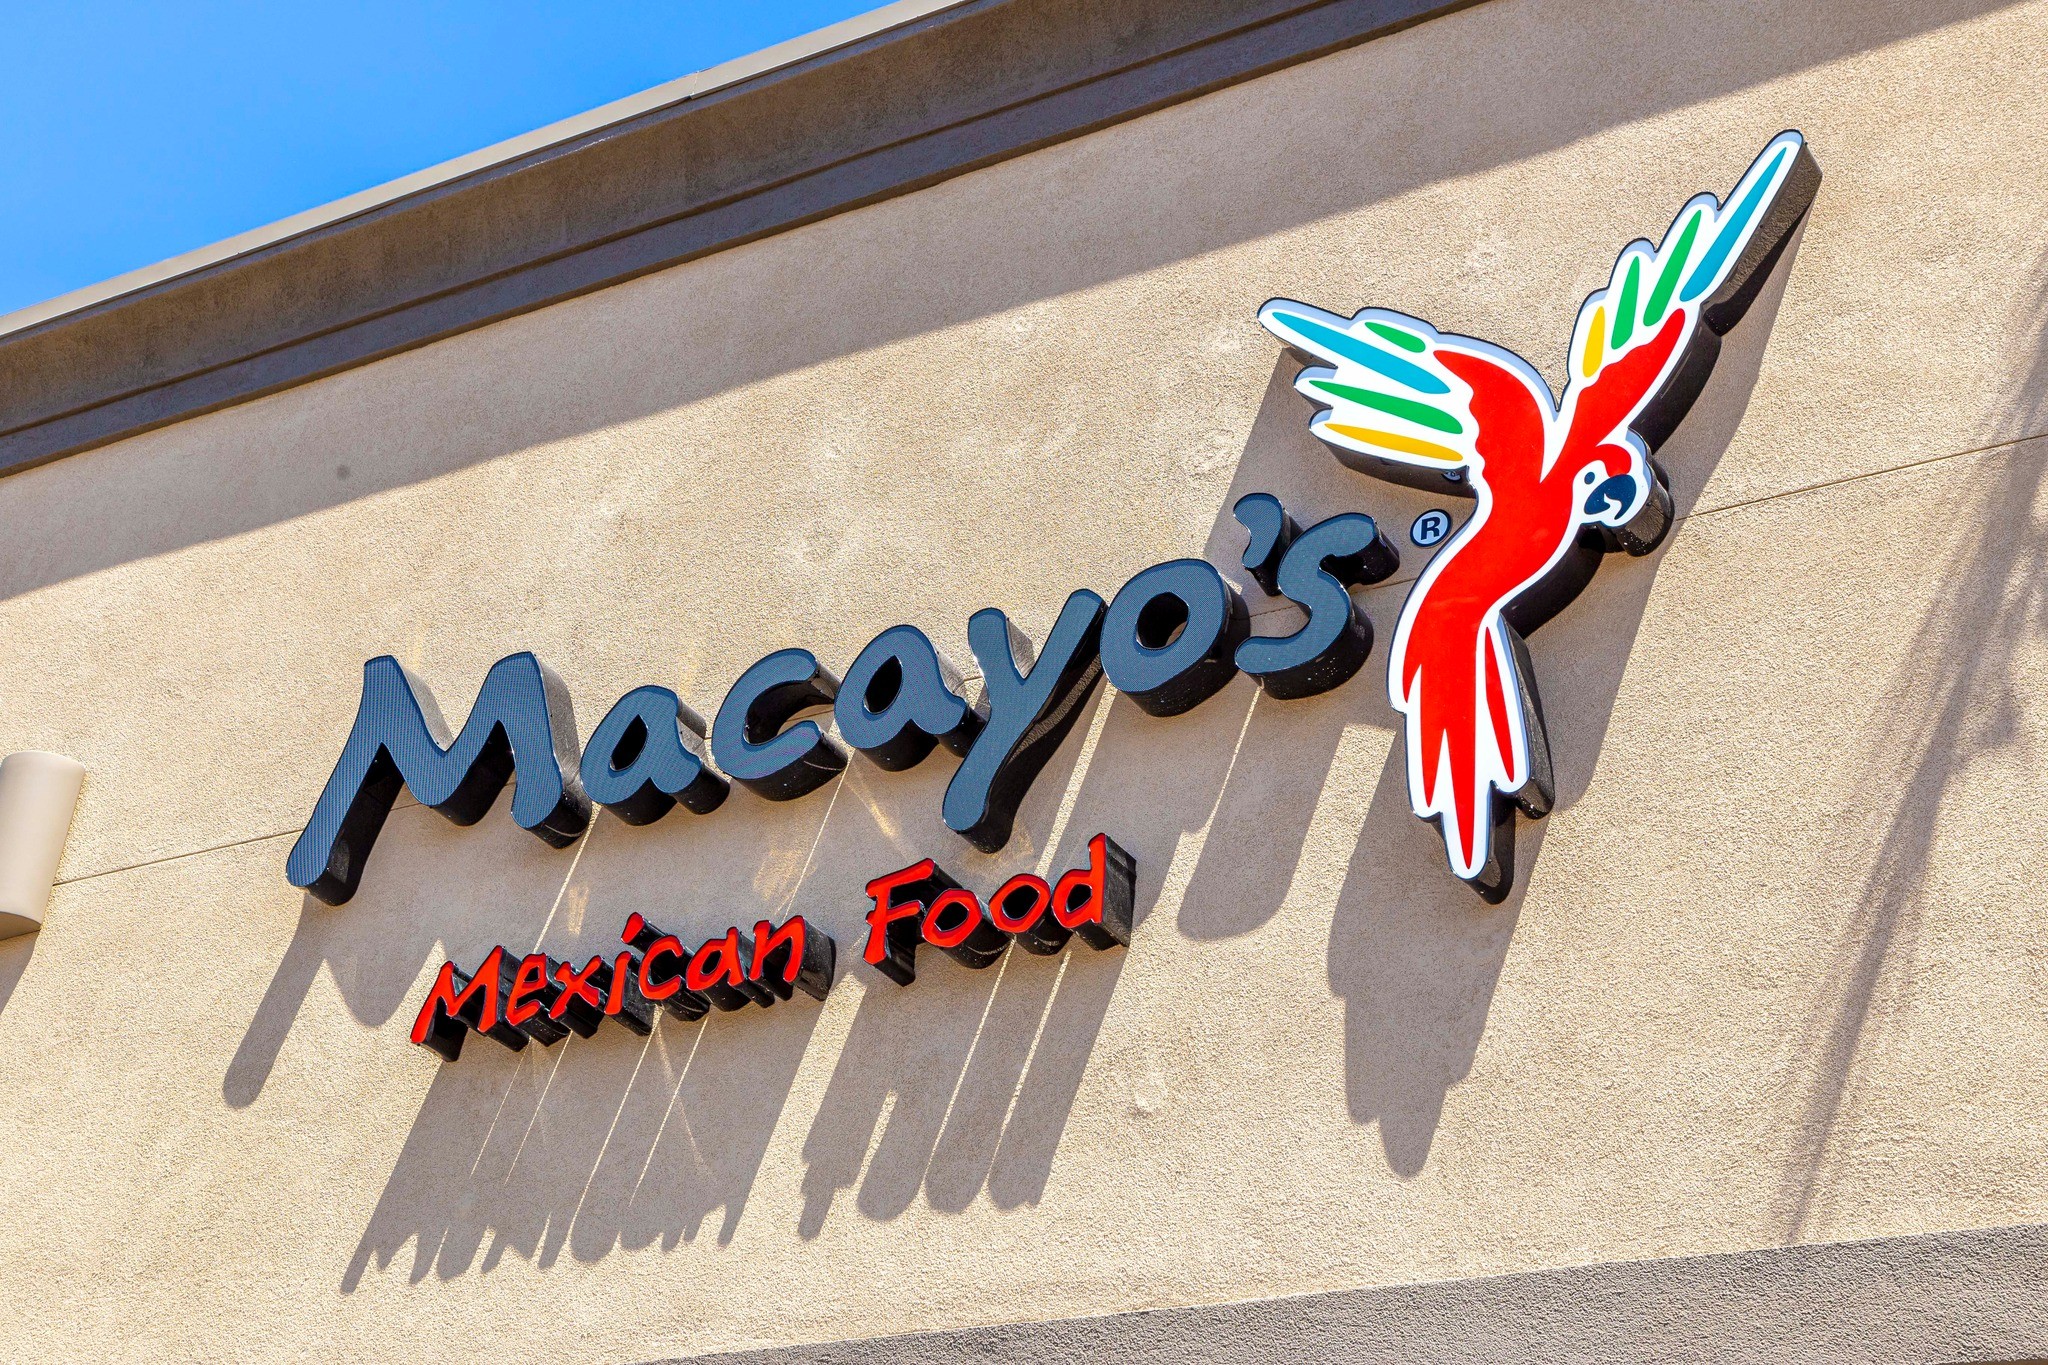 Macayo’s Mexican Food, New Brand Ownership